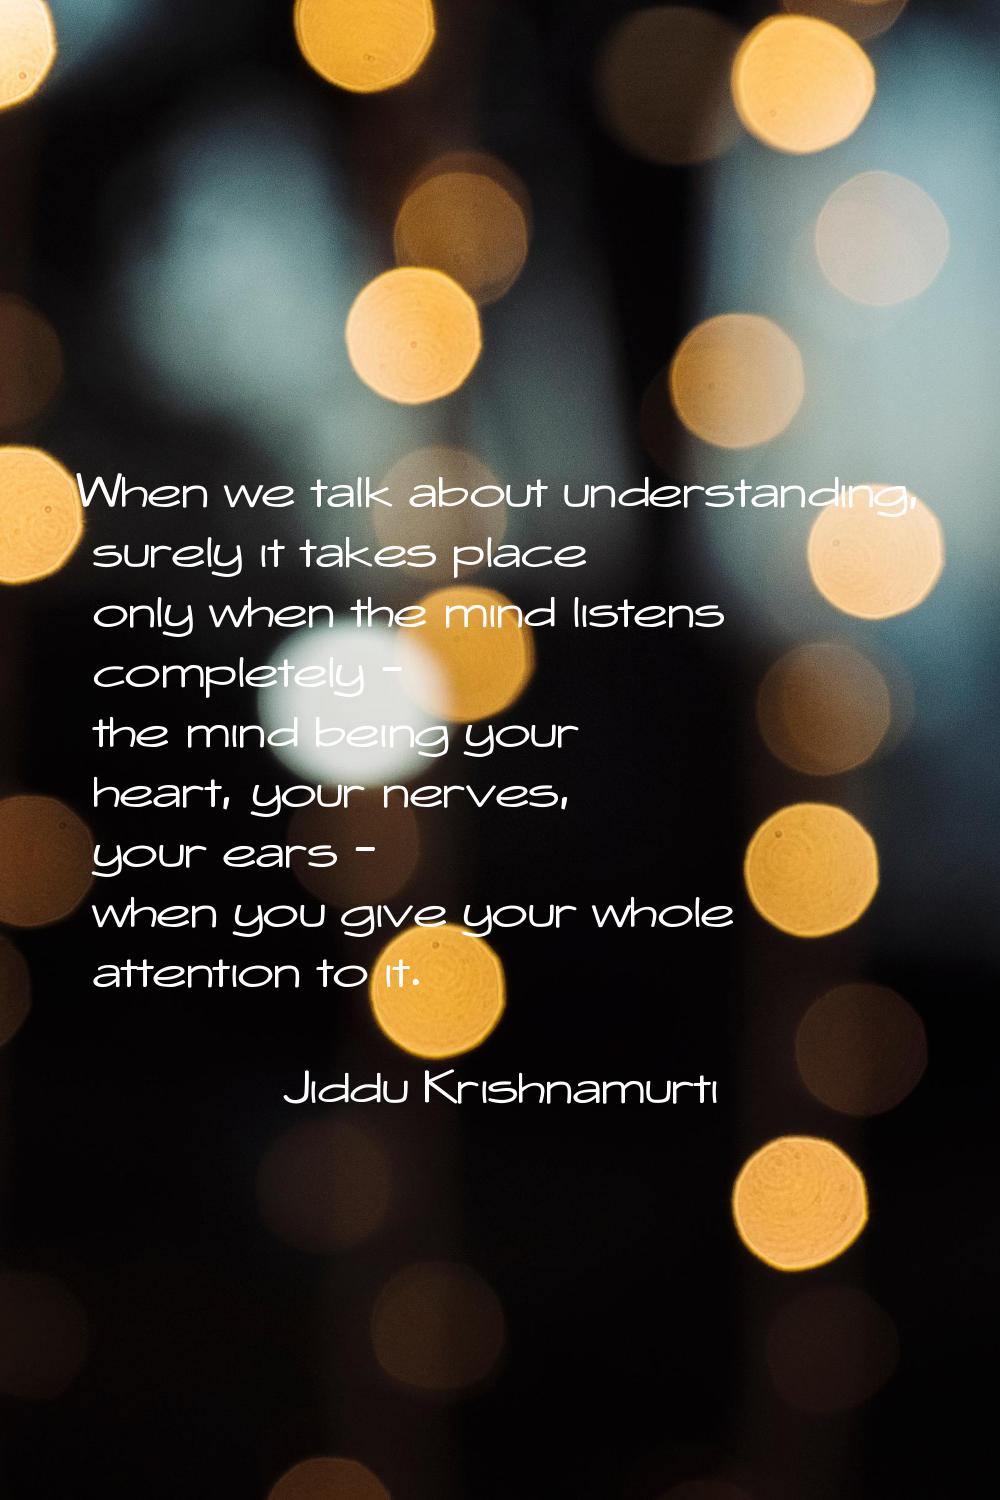 When we talk about understanding, surely it takes place only when the mind listens completely - the